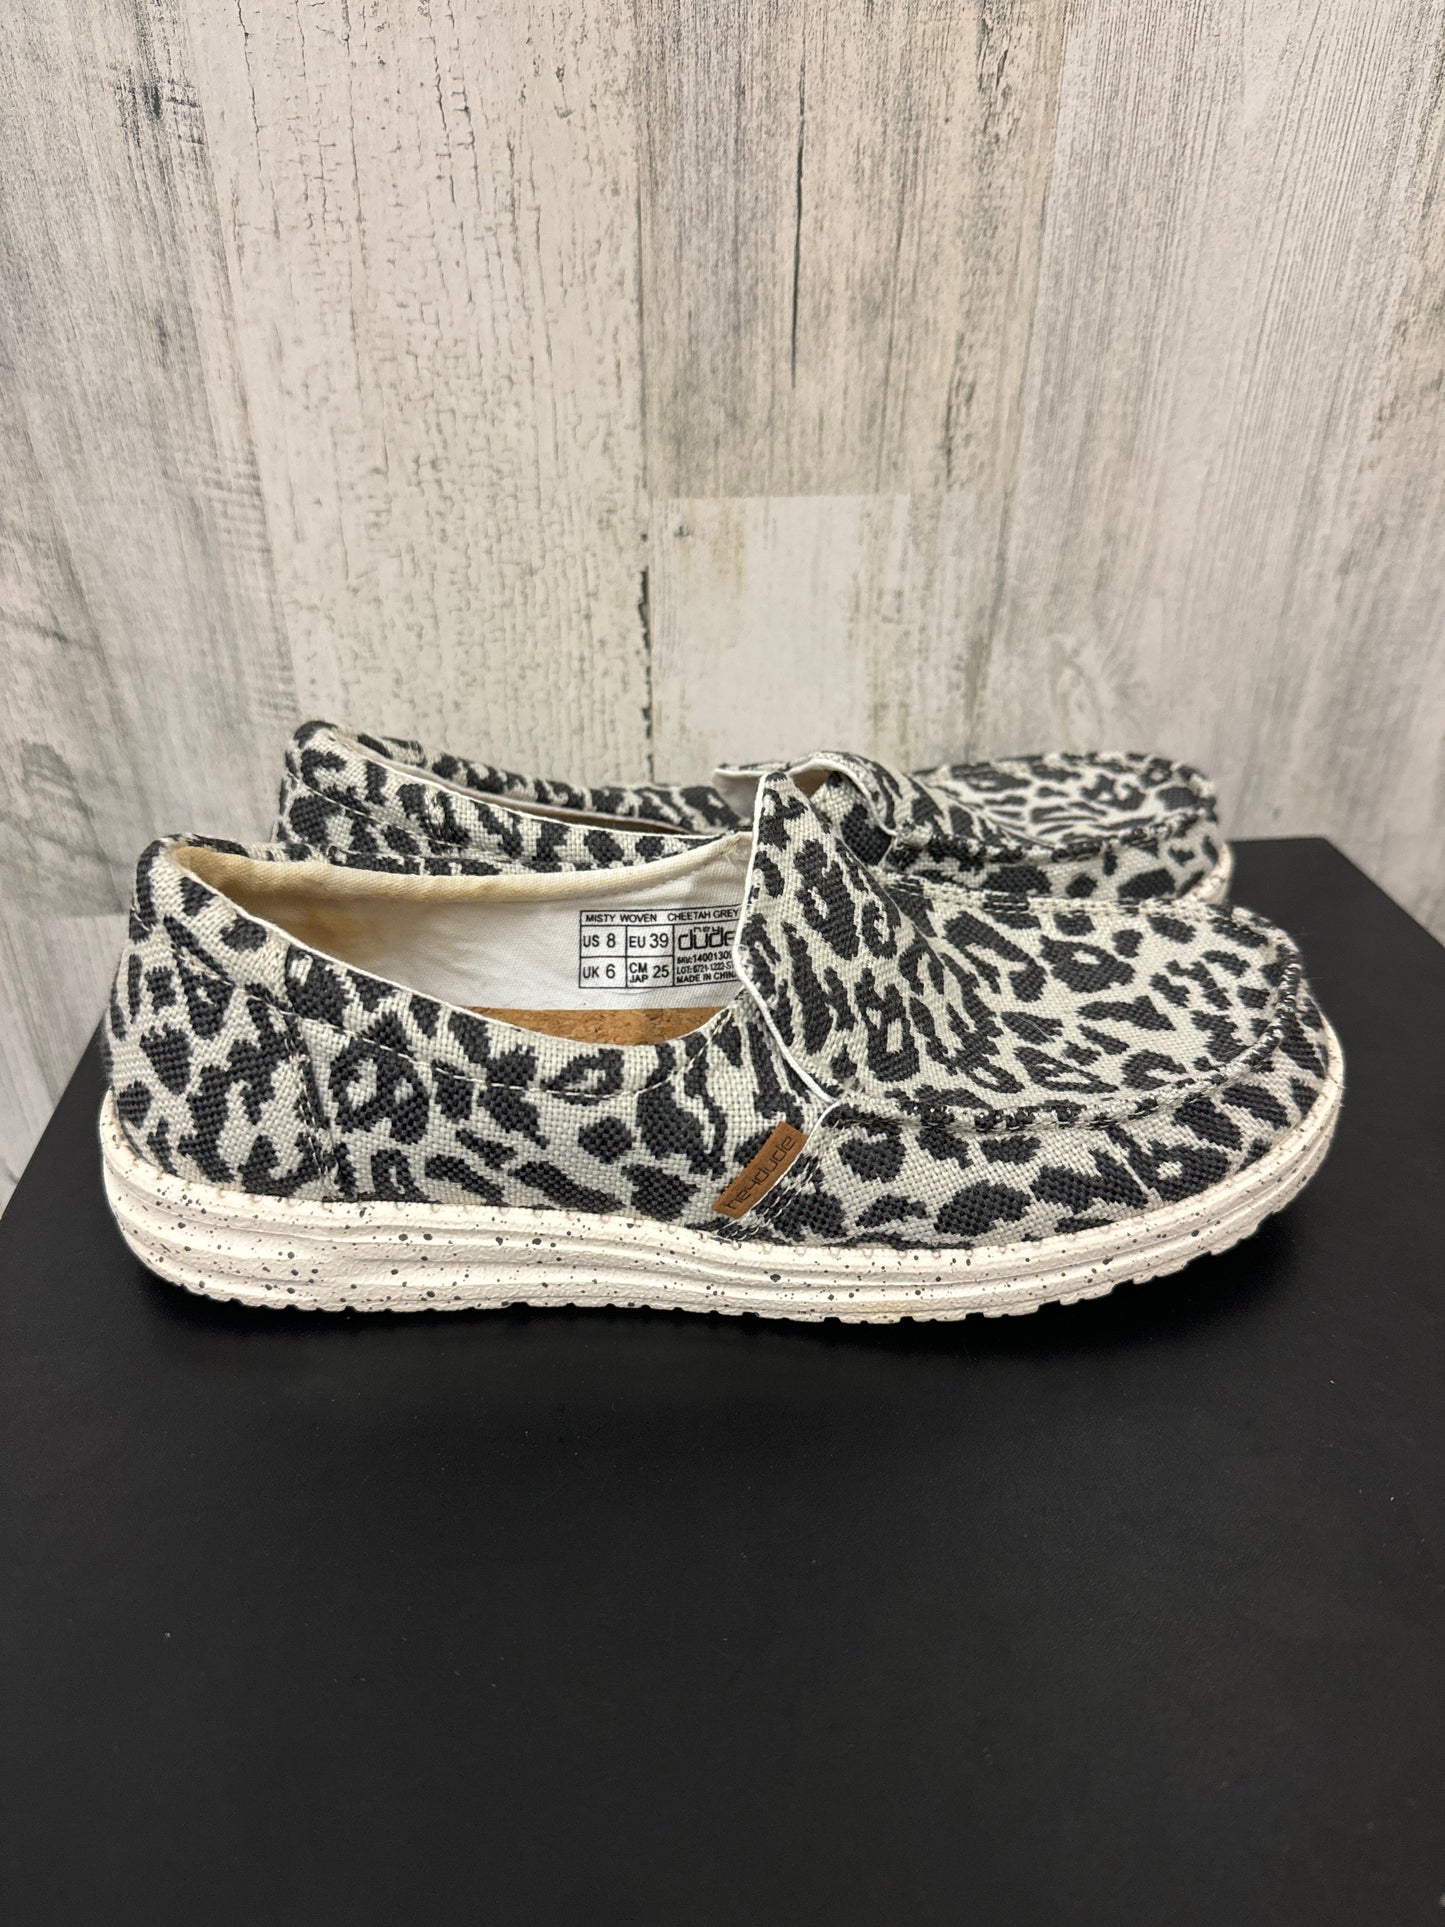 Animal Print Shoes Flats Hey Dude, Size 8